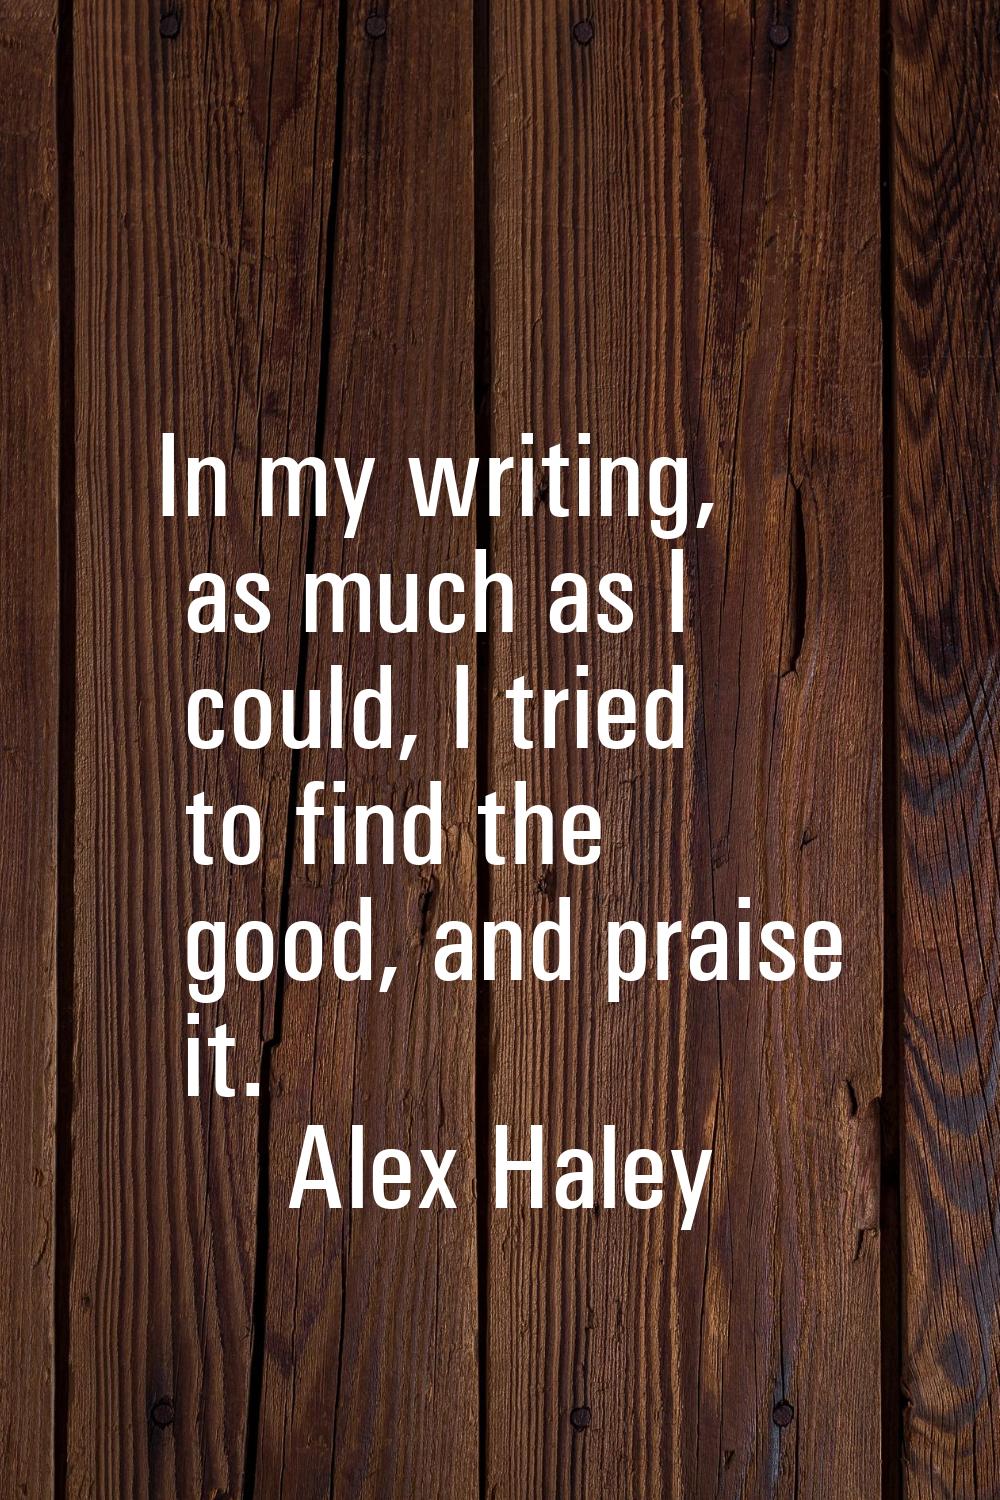 In my writing, as much as I could, I tried to find the good, and praise it.